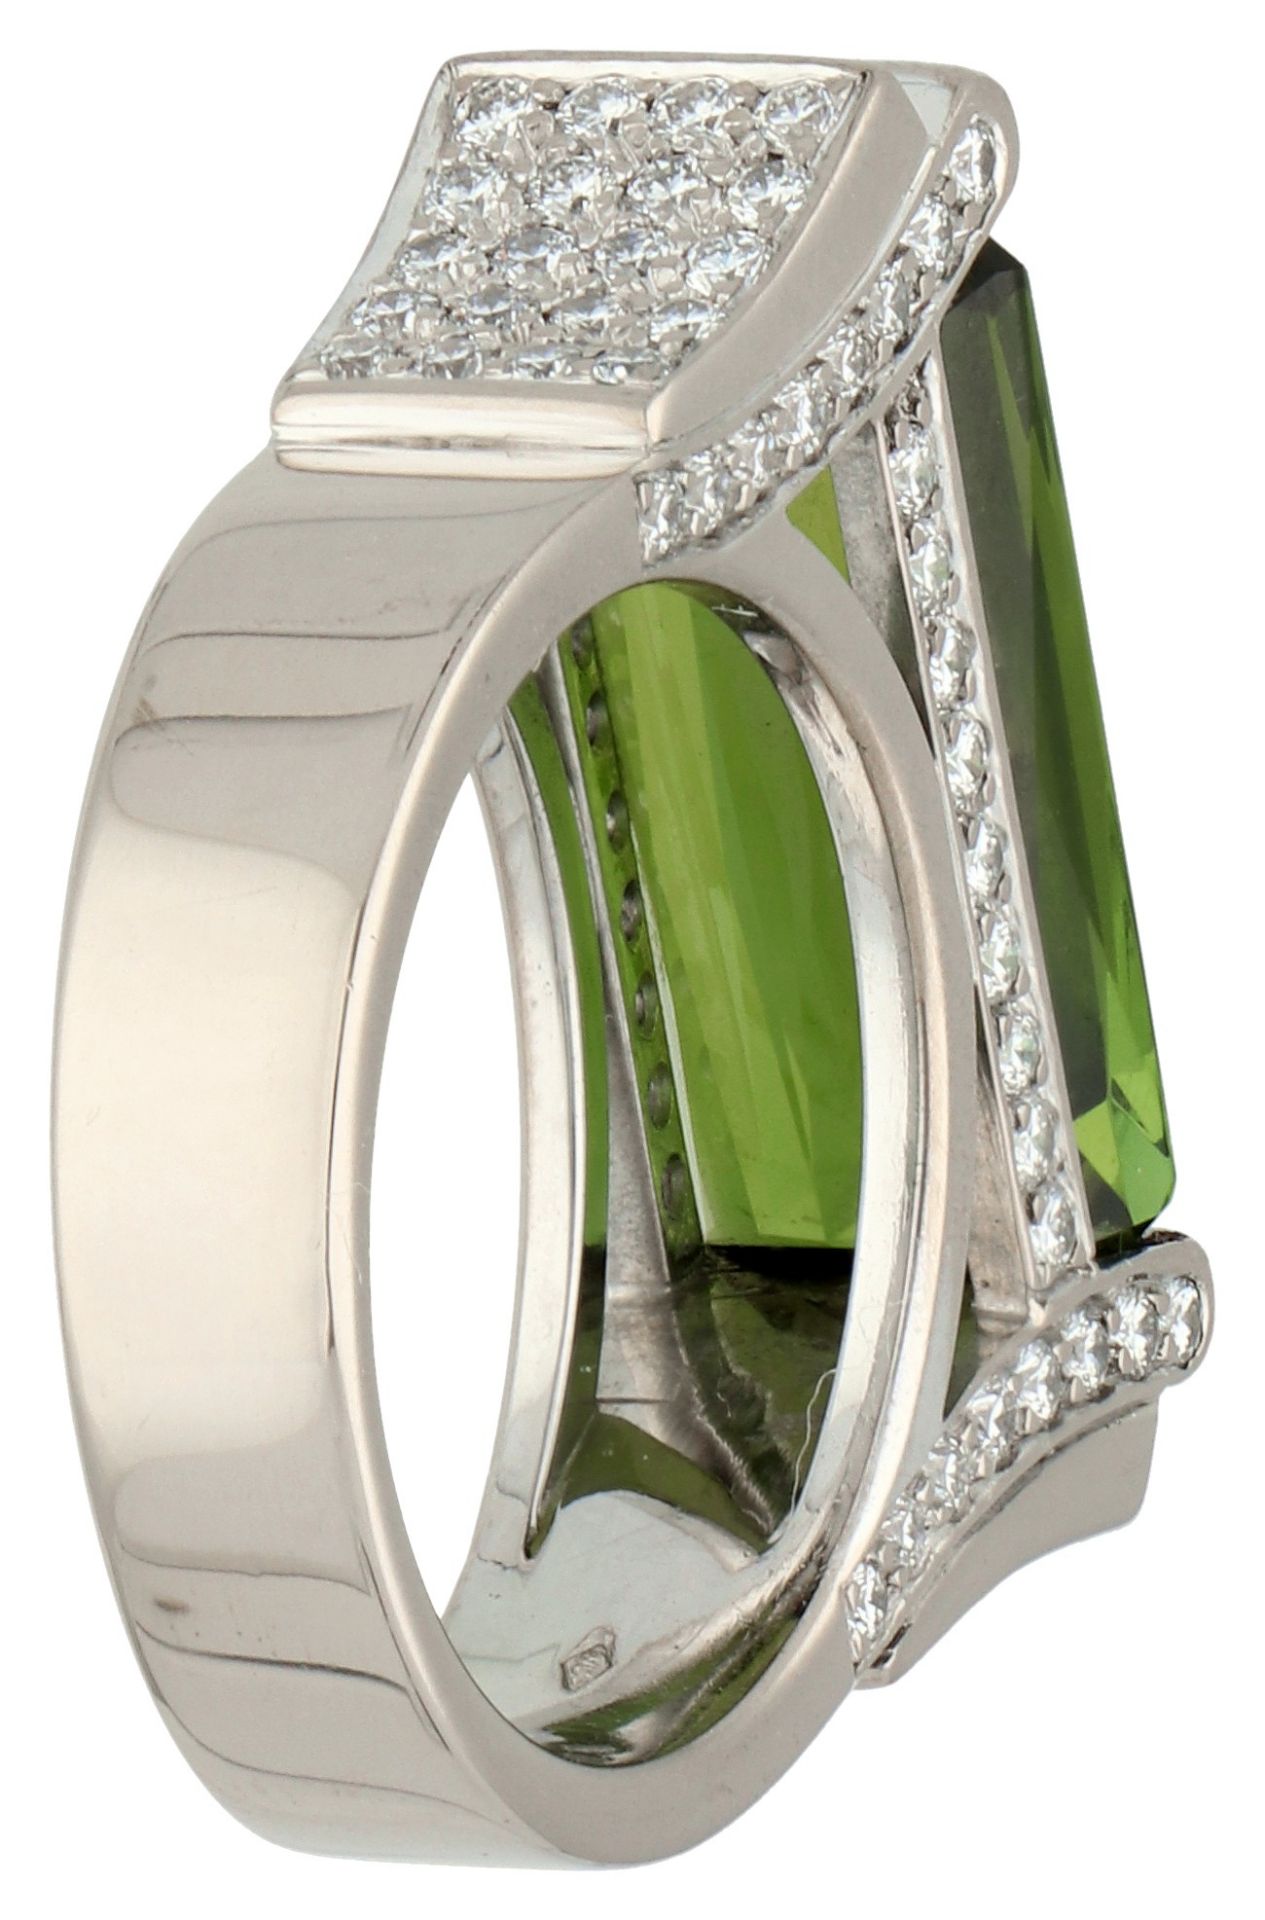 18K White gold designer ring set with approx. 6.03 ct. tourmaline and approx. 1 ct. diamond. - Image 2 of 4